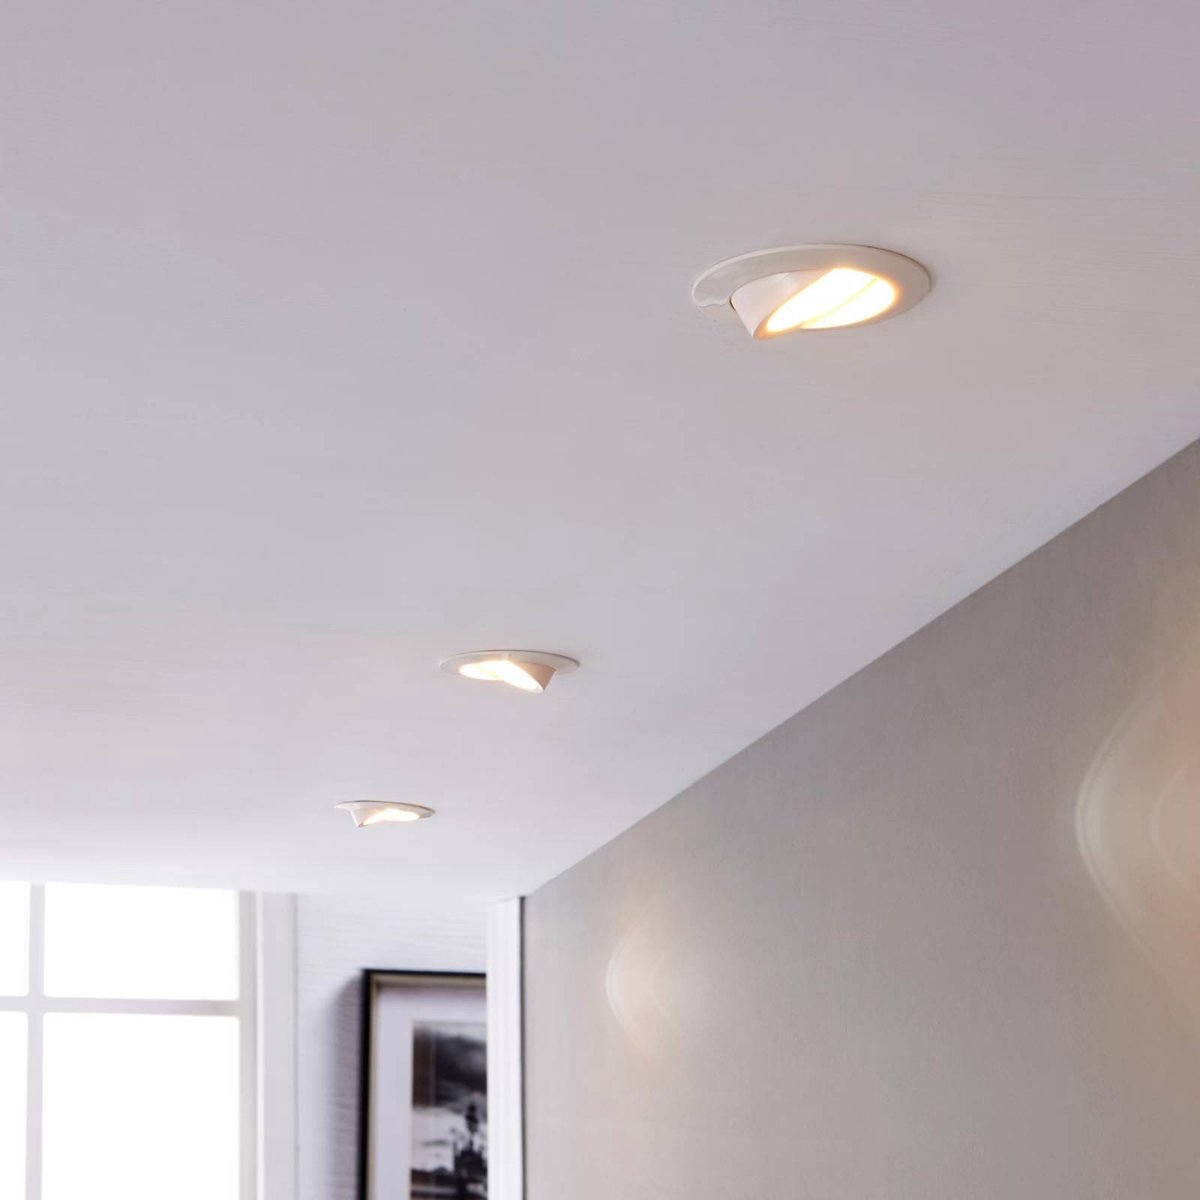 Lindby - LED downlight - 3 lichts - Kunststof, glas, metaal - H: 3.5 cm - wit, transparant - Inclusief lichtbronnen